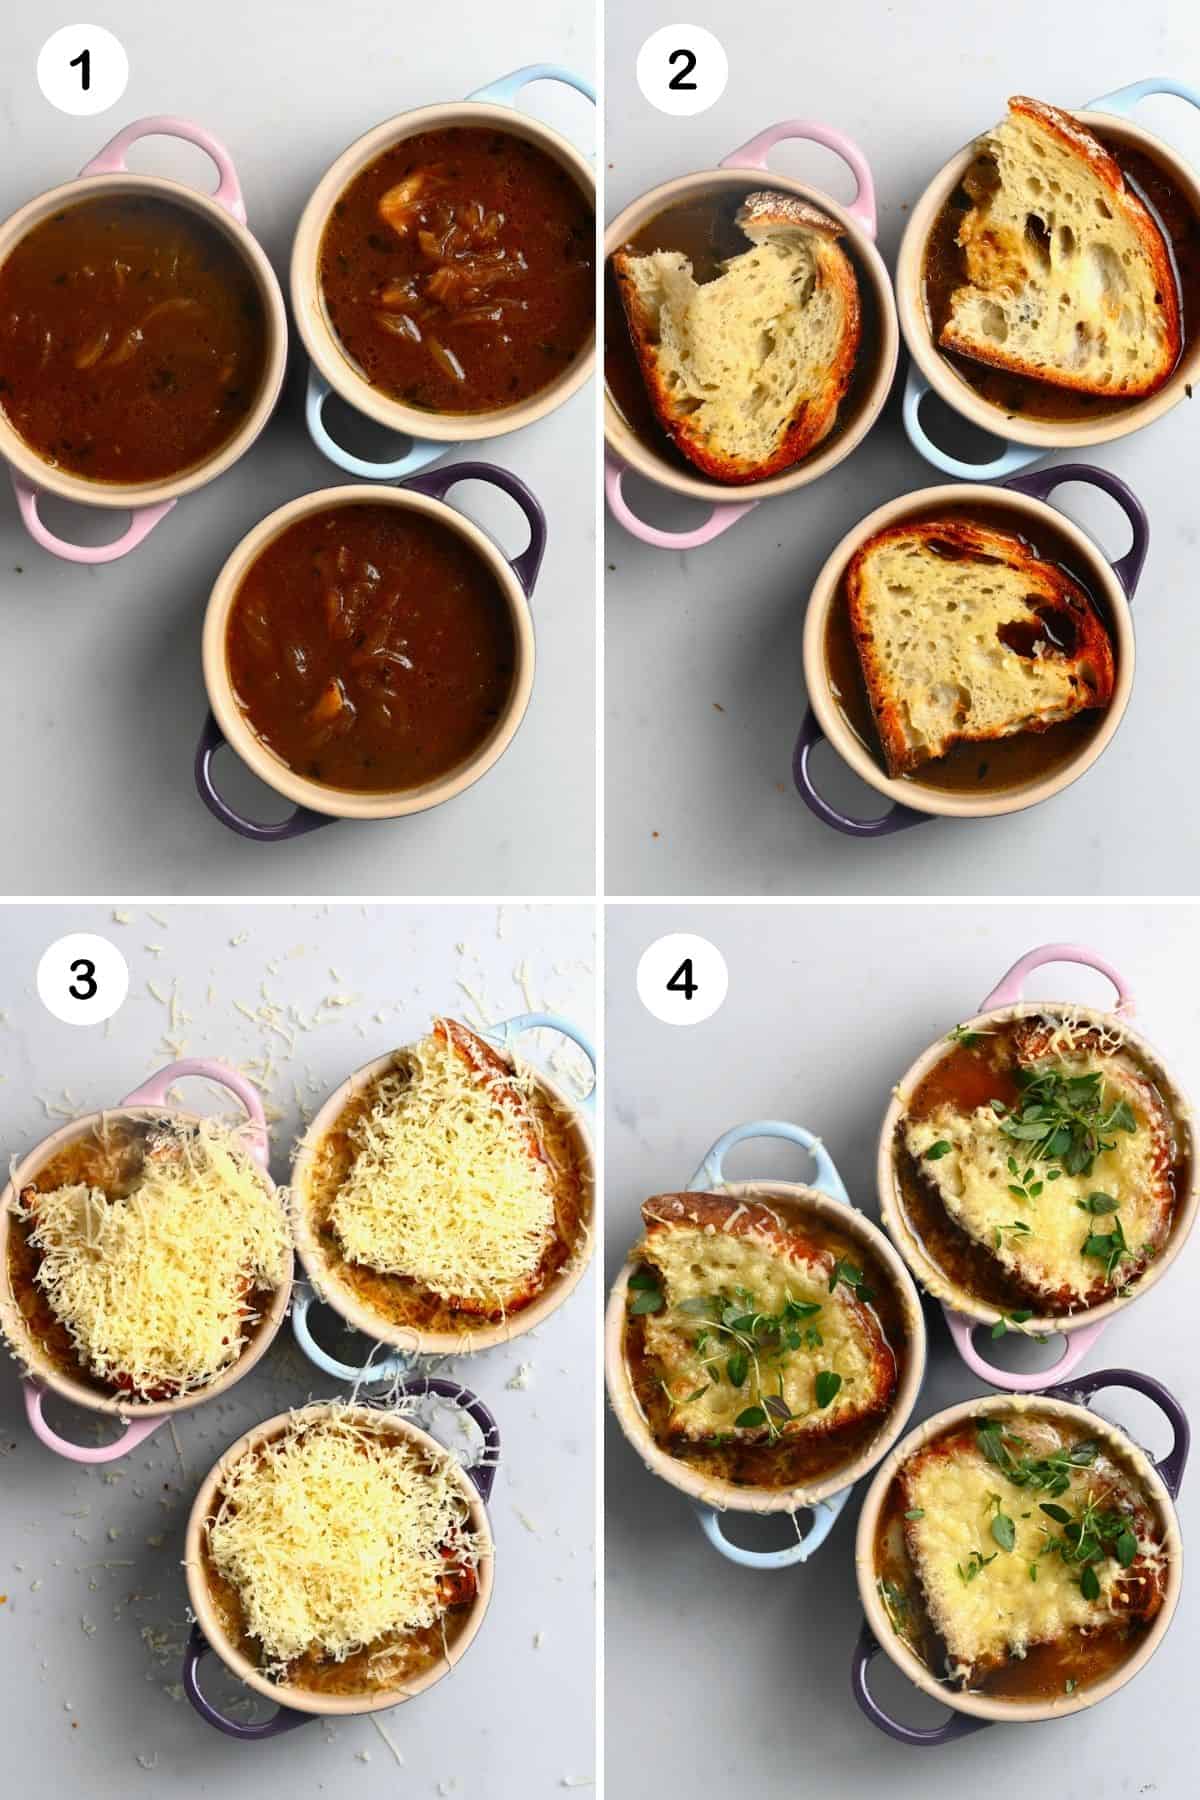 Steps for adding cheesy bread topping to onion soup